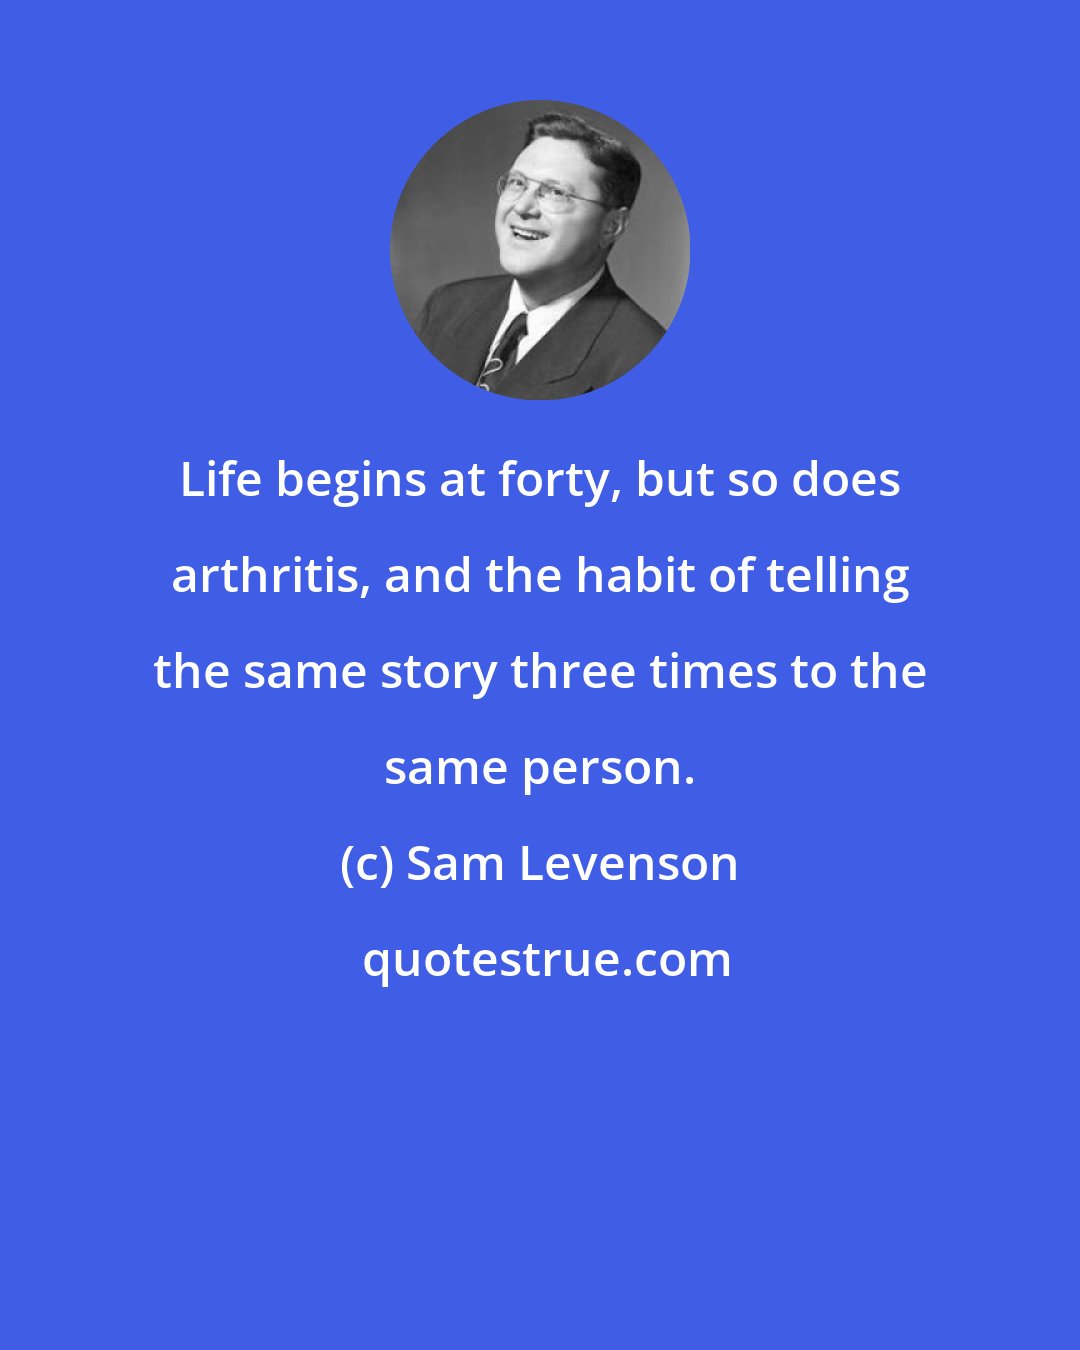 Sam Levenson: Life begins at forty, but so does arthritis, and the habit of telling the same story three times to the same person.